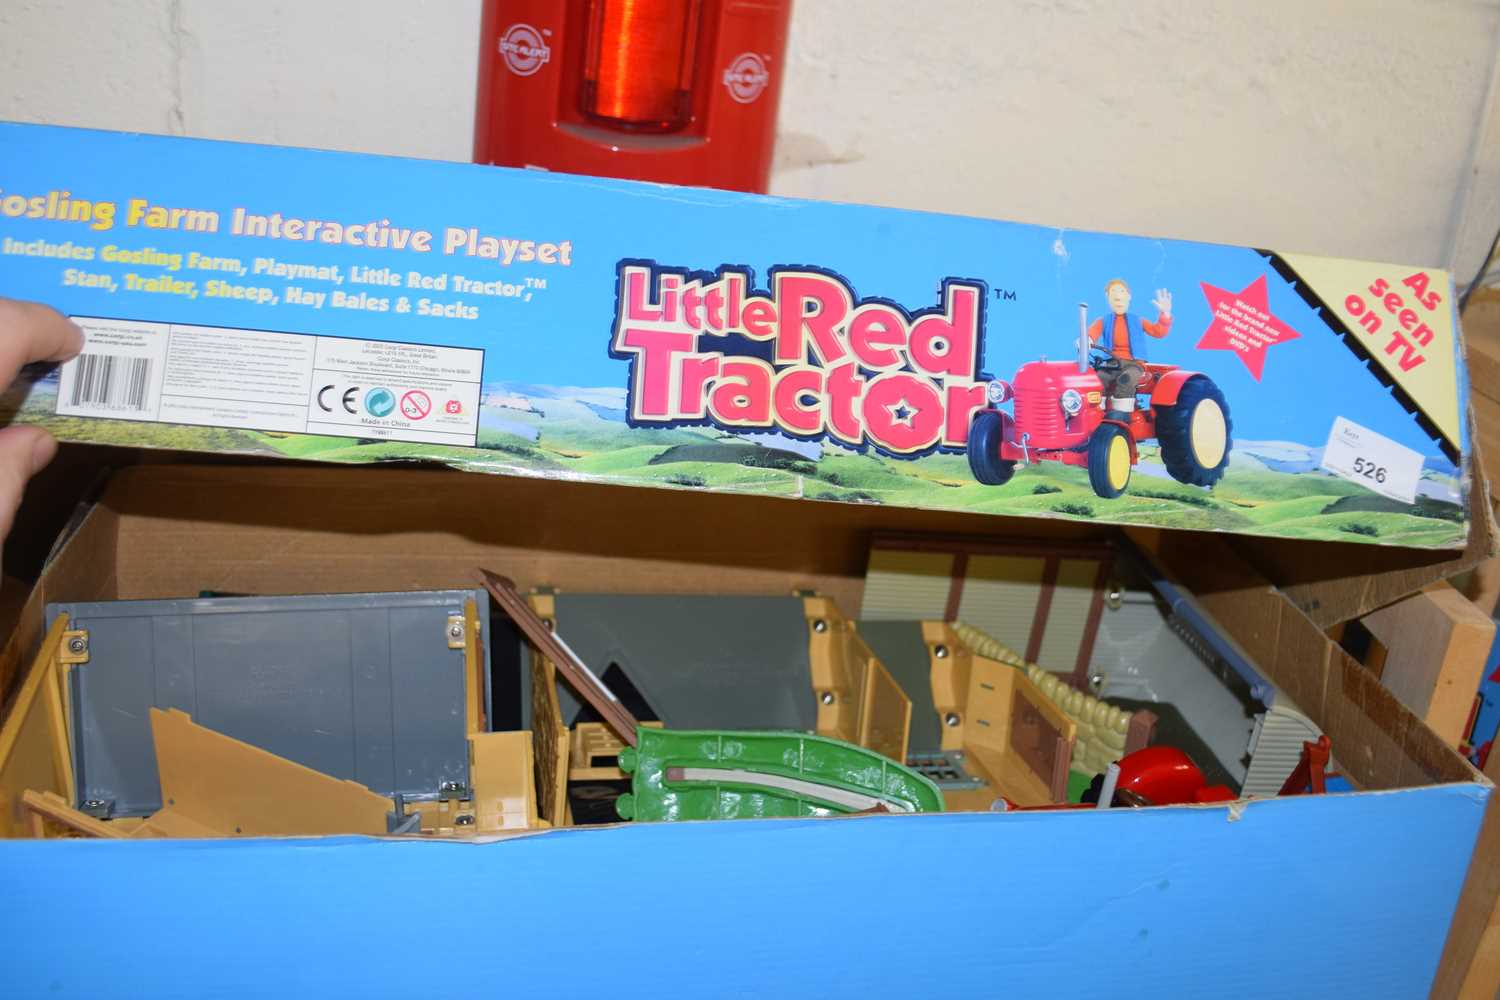 CORGI 'LITTLE RED TRACTOR' INTERACTIVE PLAY SET (NOT CHECKED FOR COMPLETENESS)